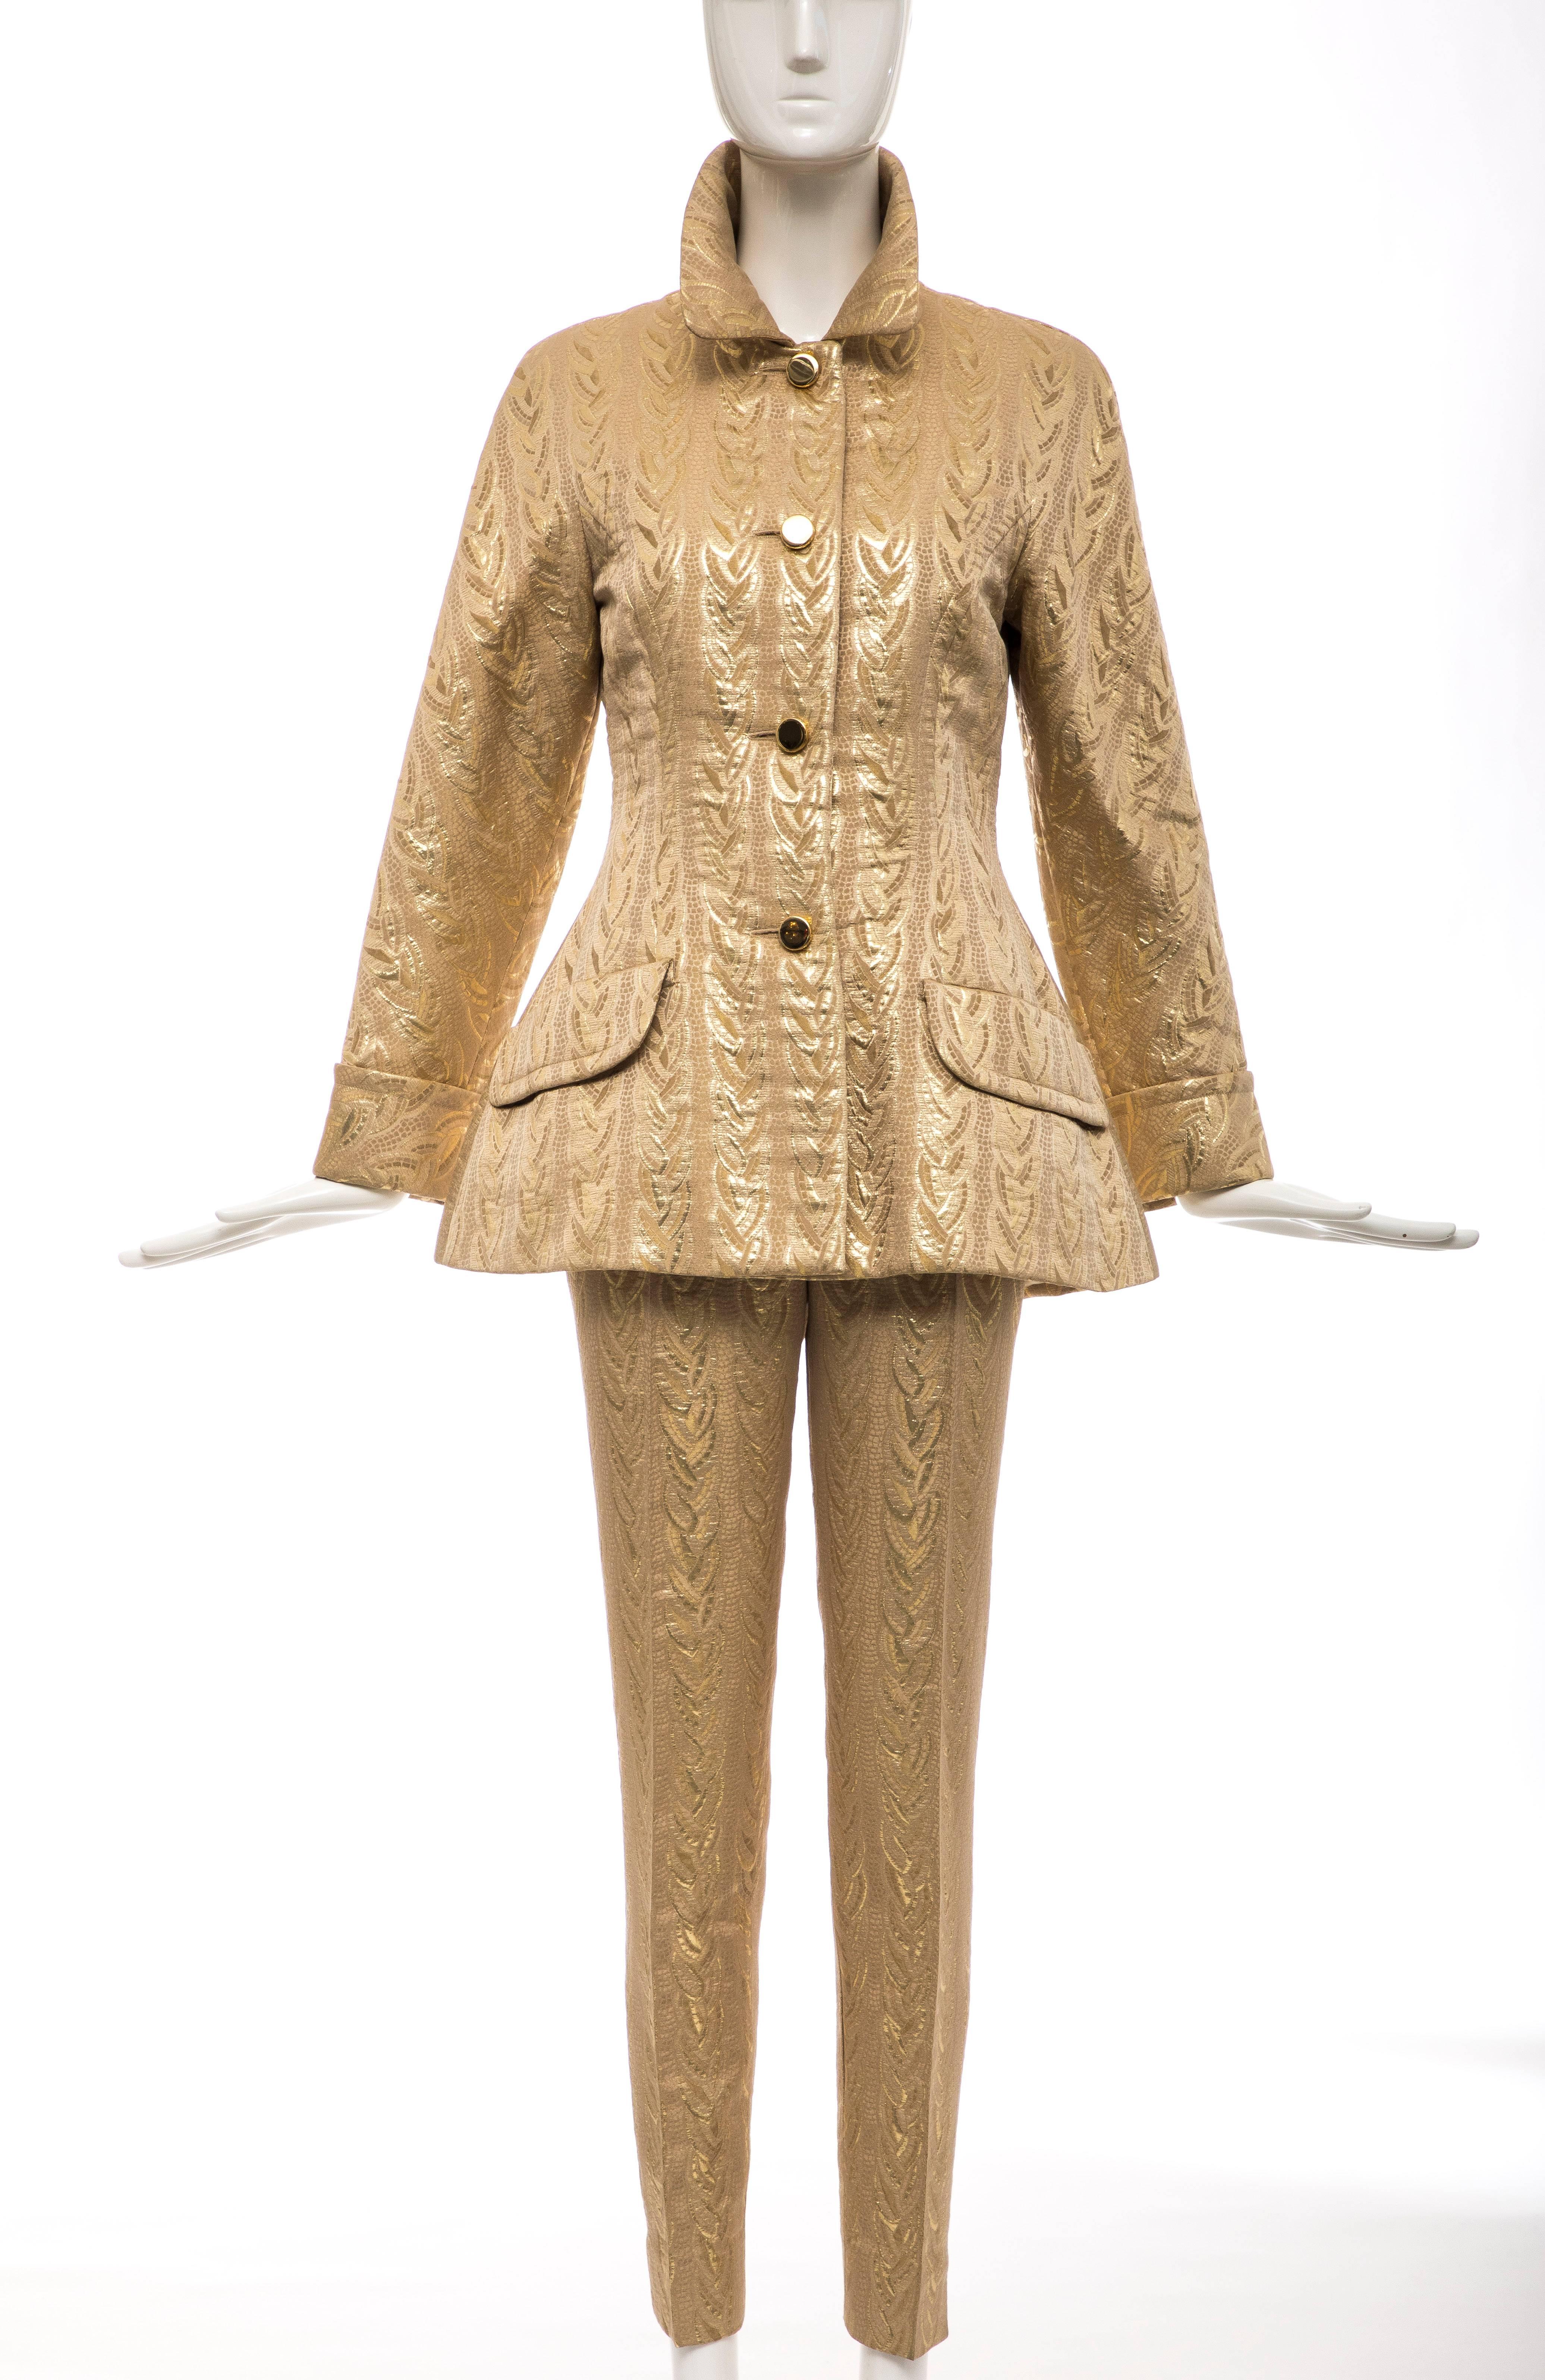 Prada, Autumn/Winter 1992, three piece gold brocade ensemble. The button front jacket has two front pockets, self belt, cuffed sleeves and fully lined. The slim leg pant has side zip and button closure and short skirt has side zip, button closure